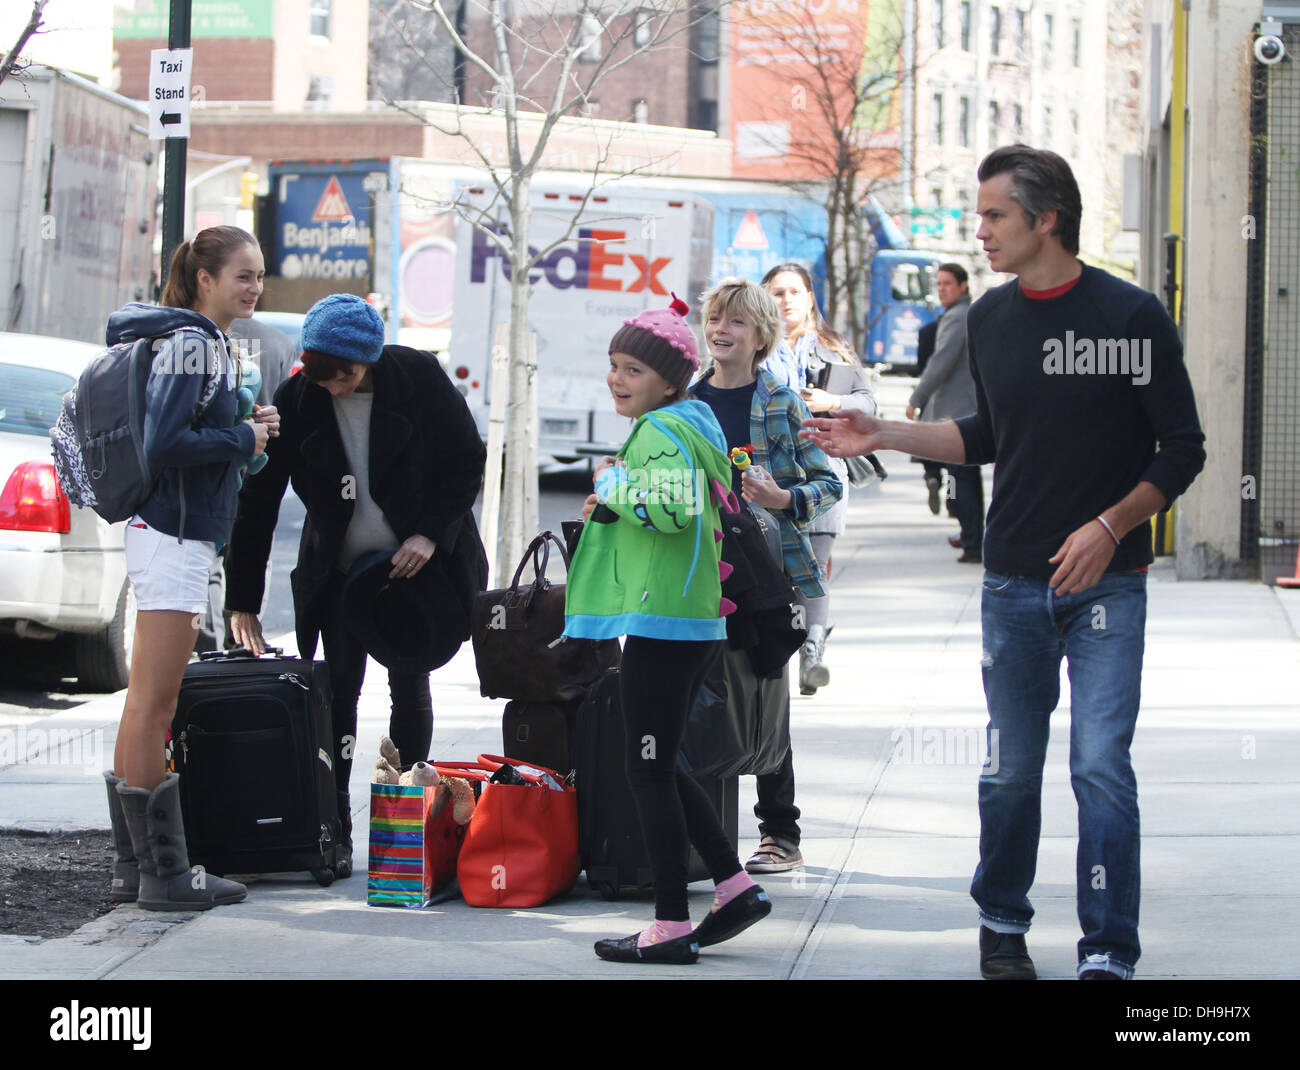 Timothy Olyphant Celebrities out and about in Soho New York City, USA - 30.03.12 Stock Photo